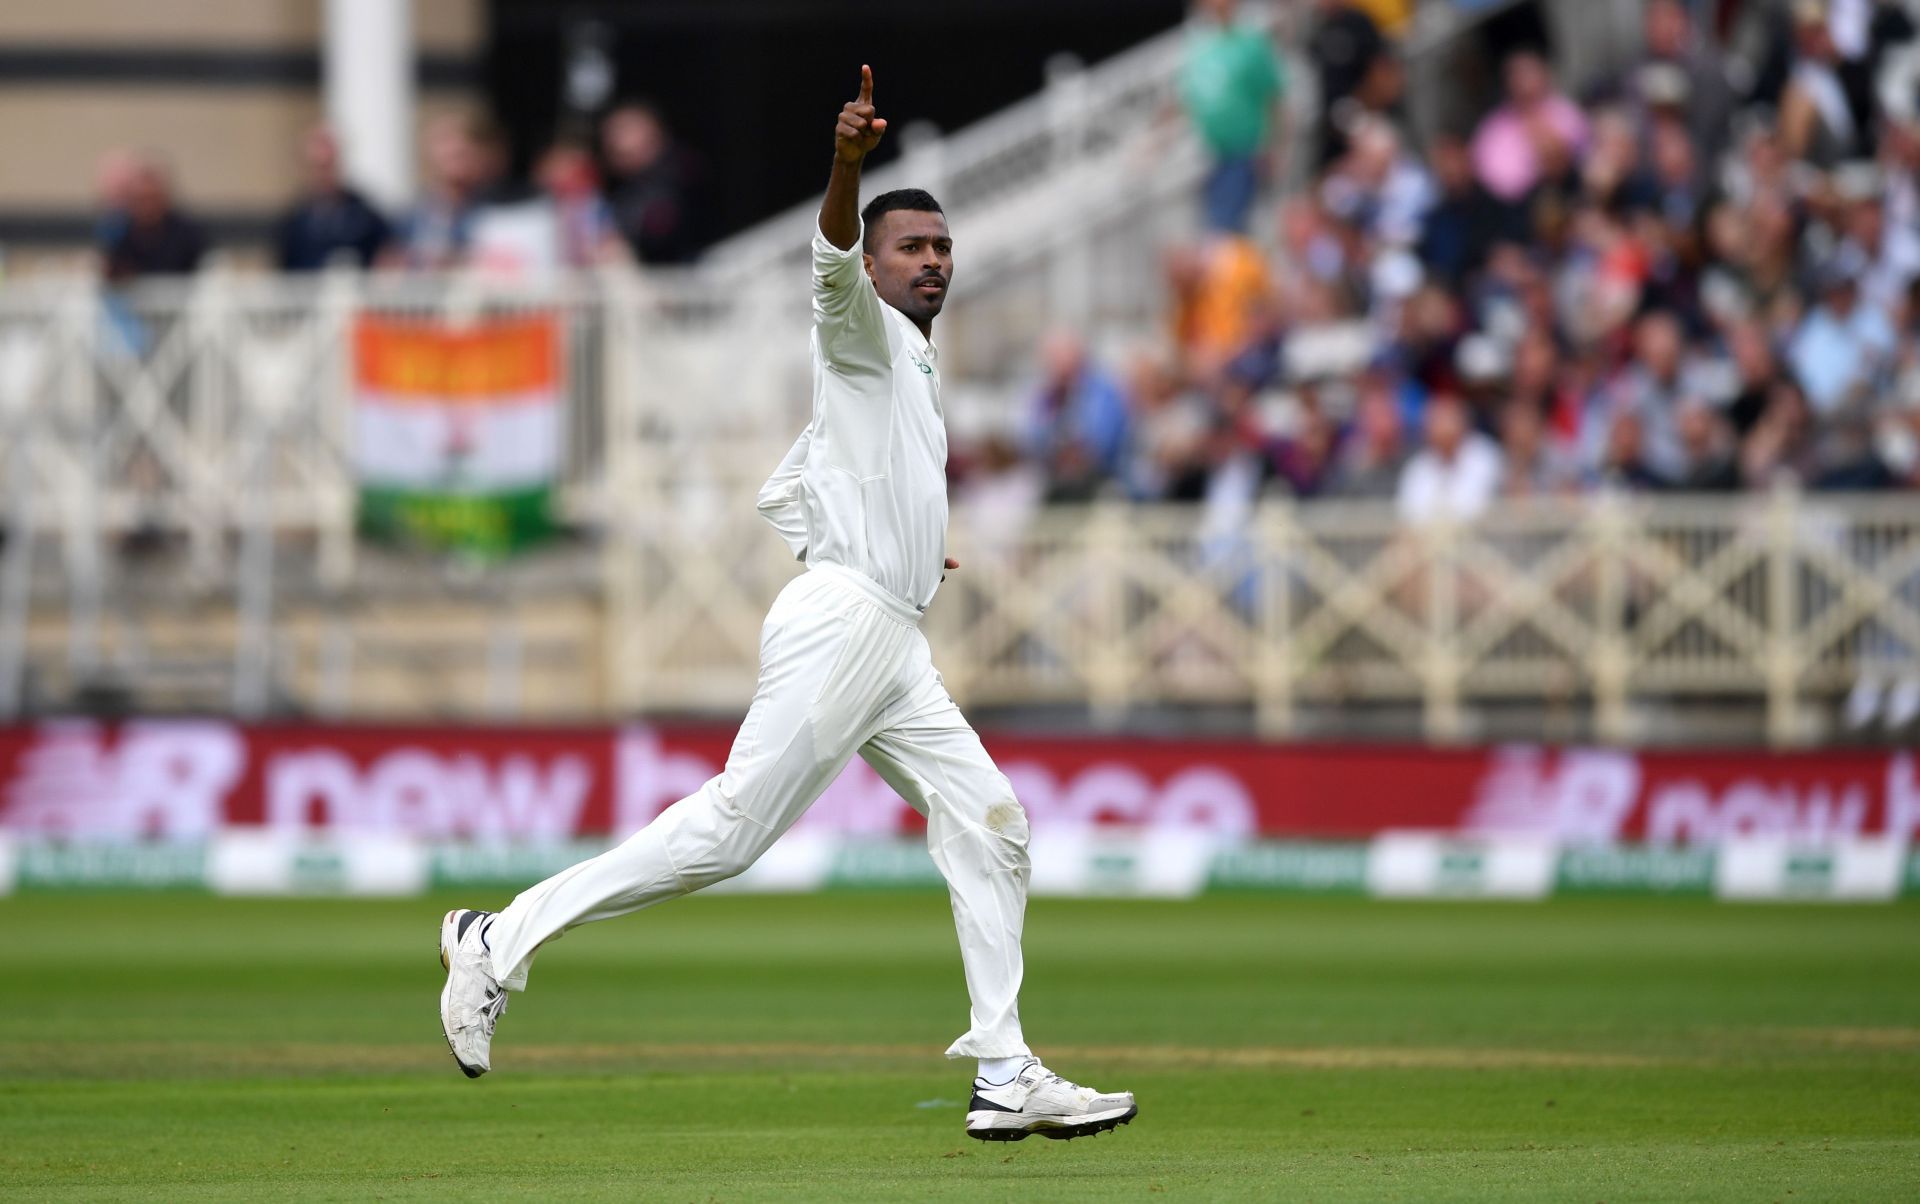 Hardik changed the game with his bowling